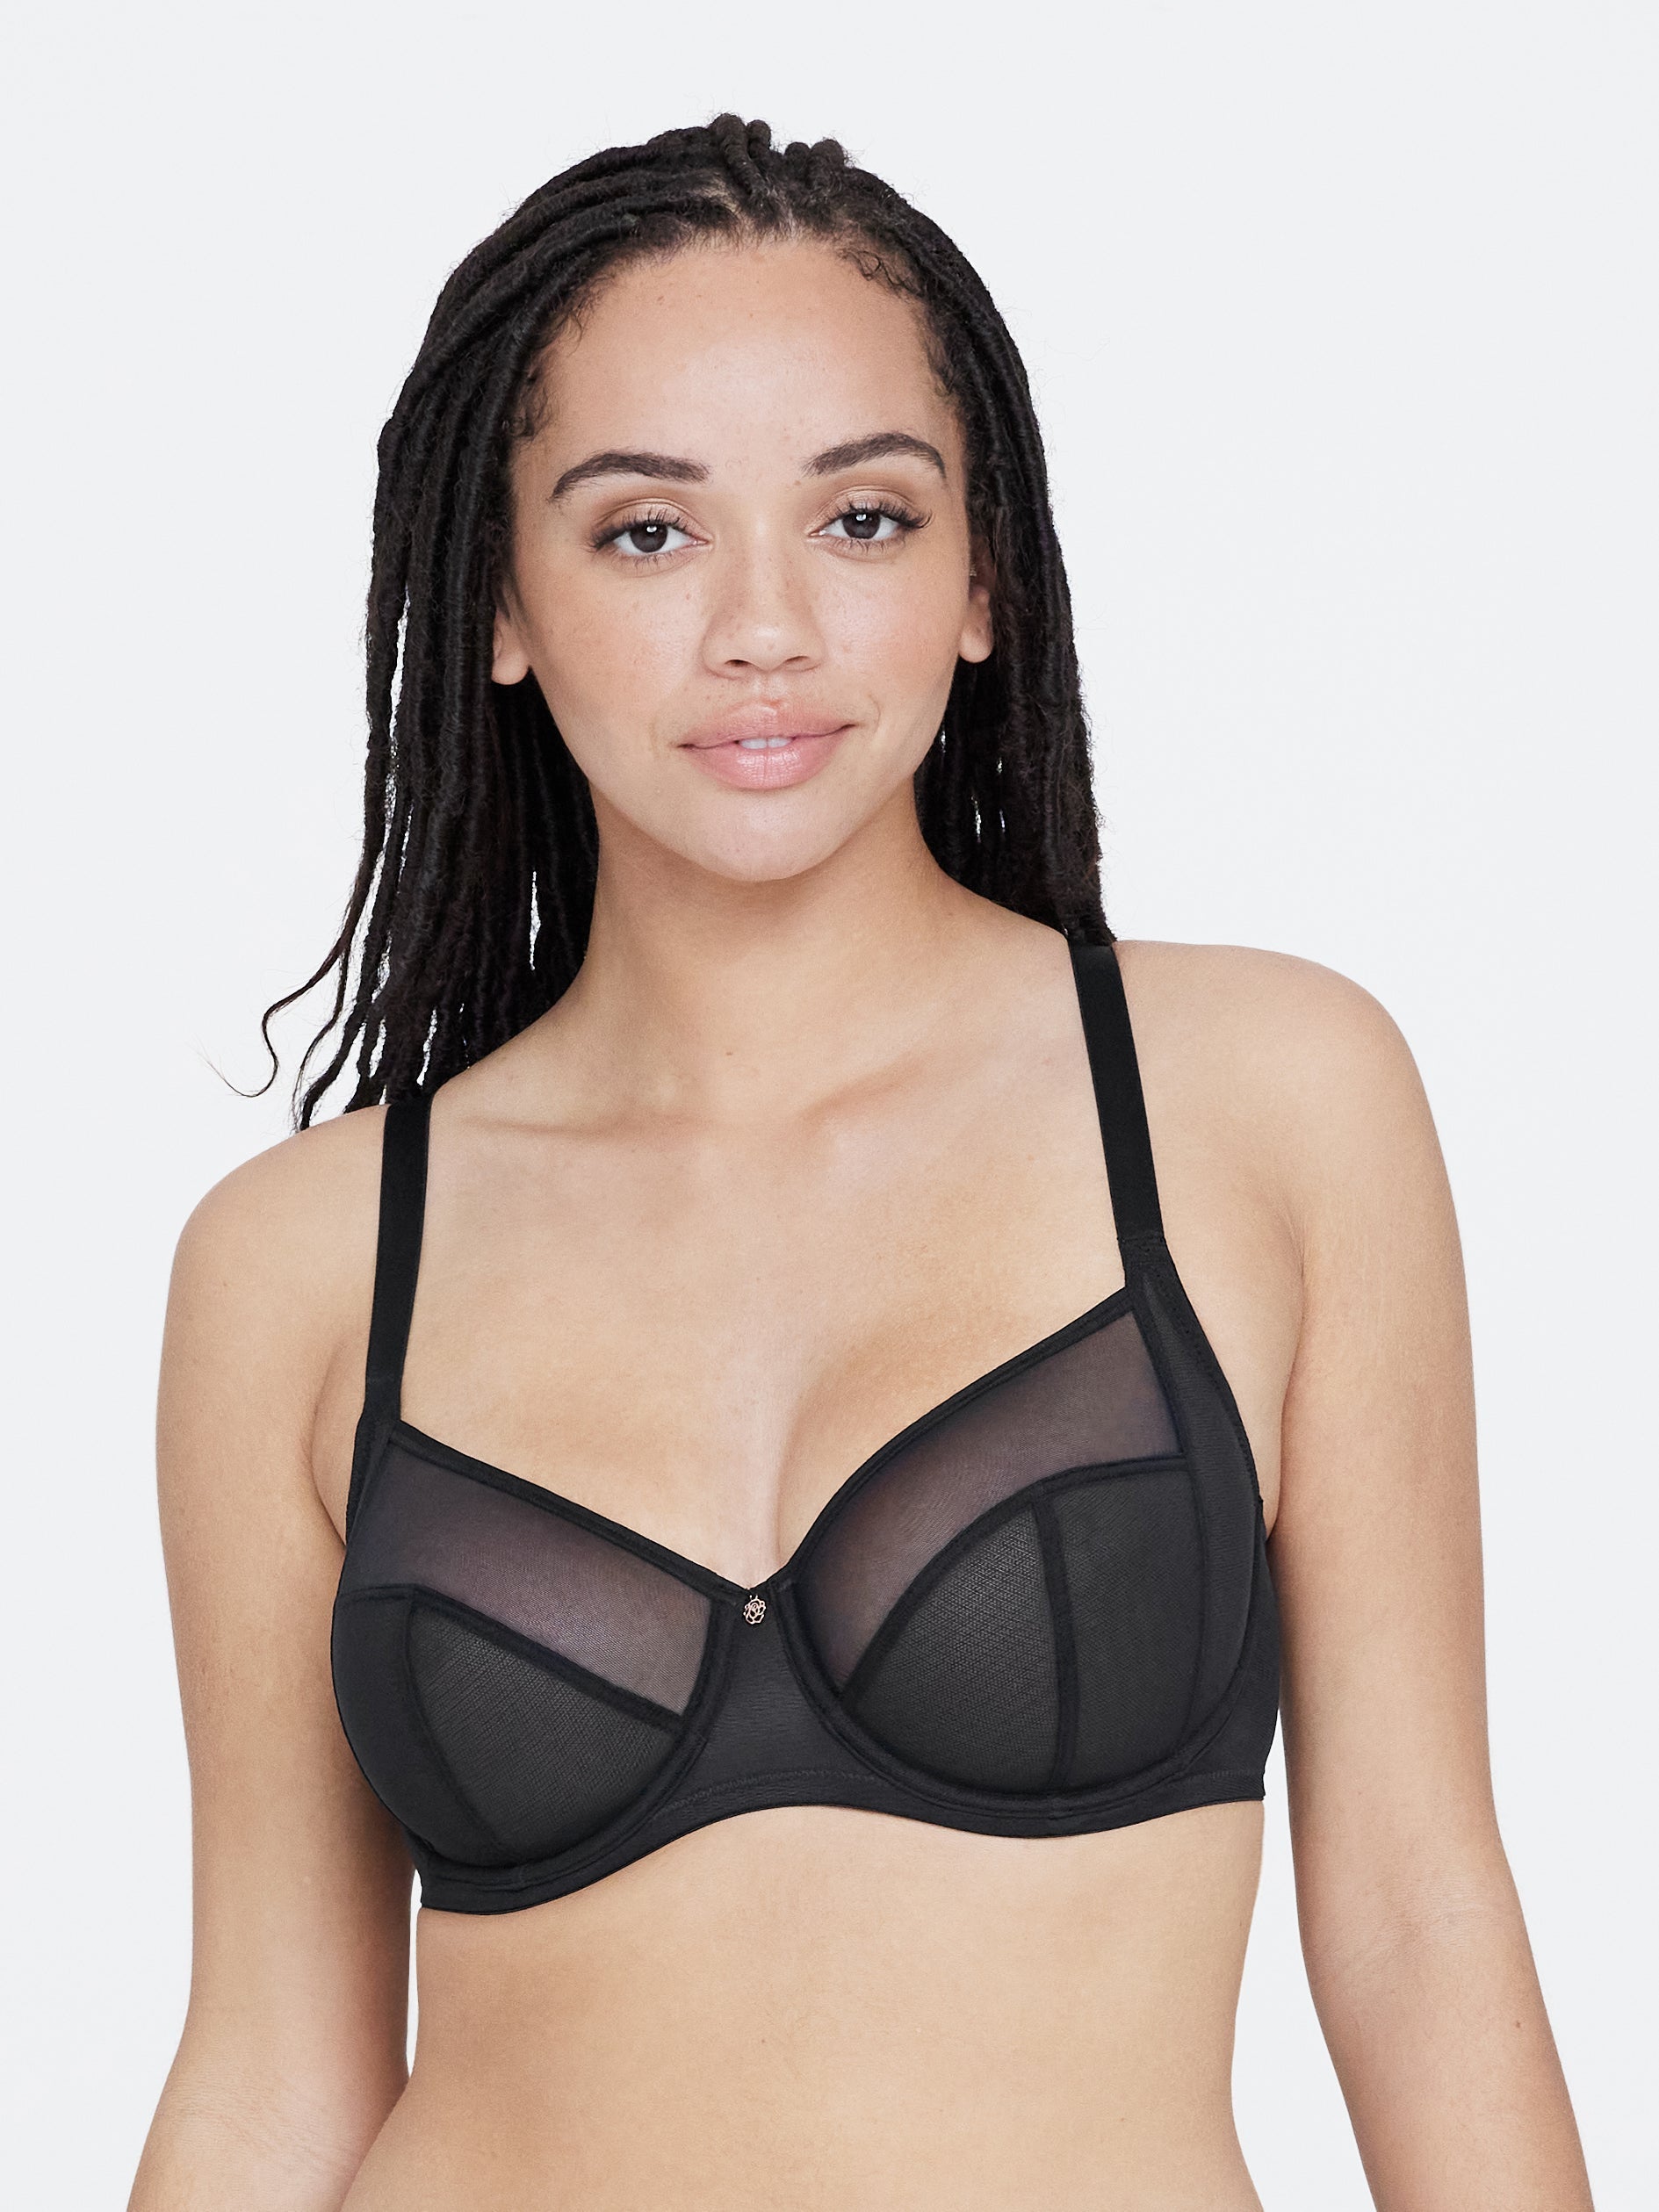 Spellbound Black/Lime Peek-A-Boo Silk Bra - For Her from The Luxe Company UK